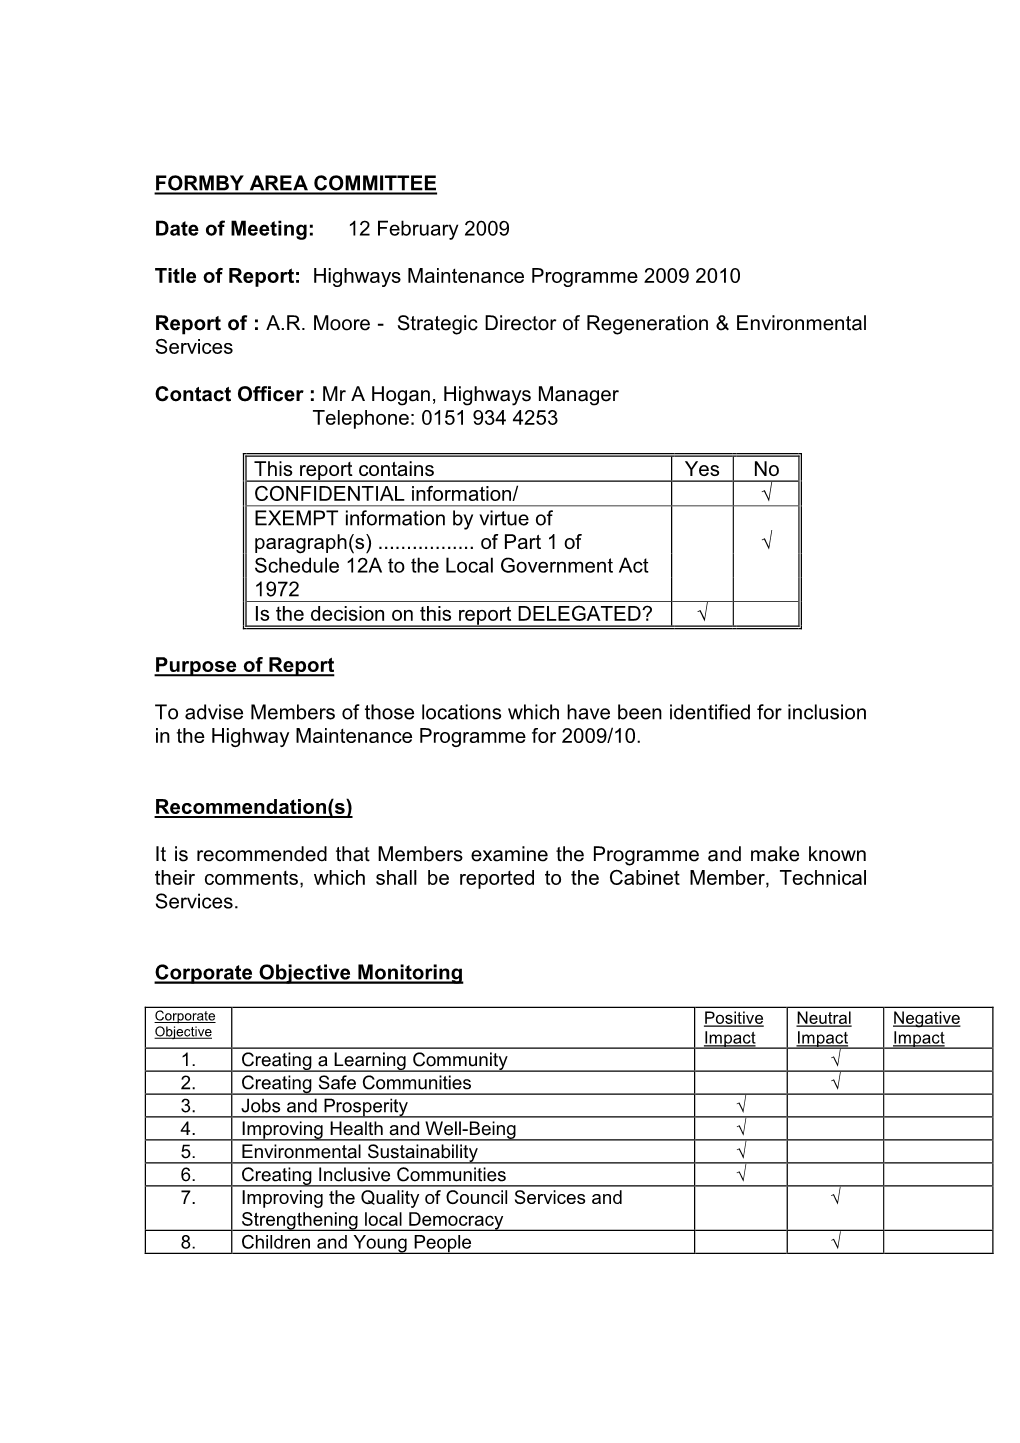 FORMBY AREA COMMITTEE Date of Meeting: 12 February 2009 Title Of